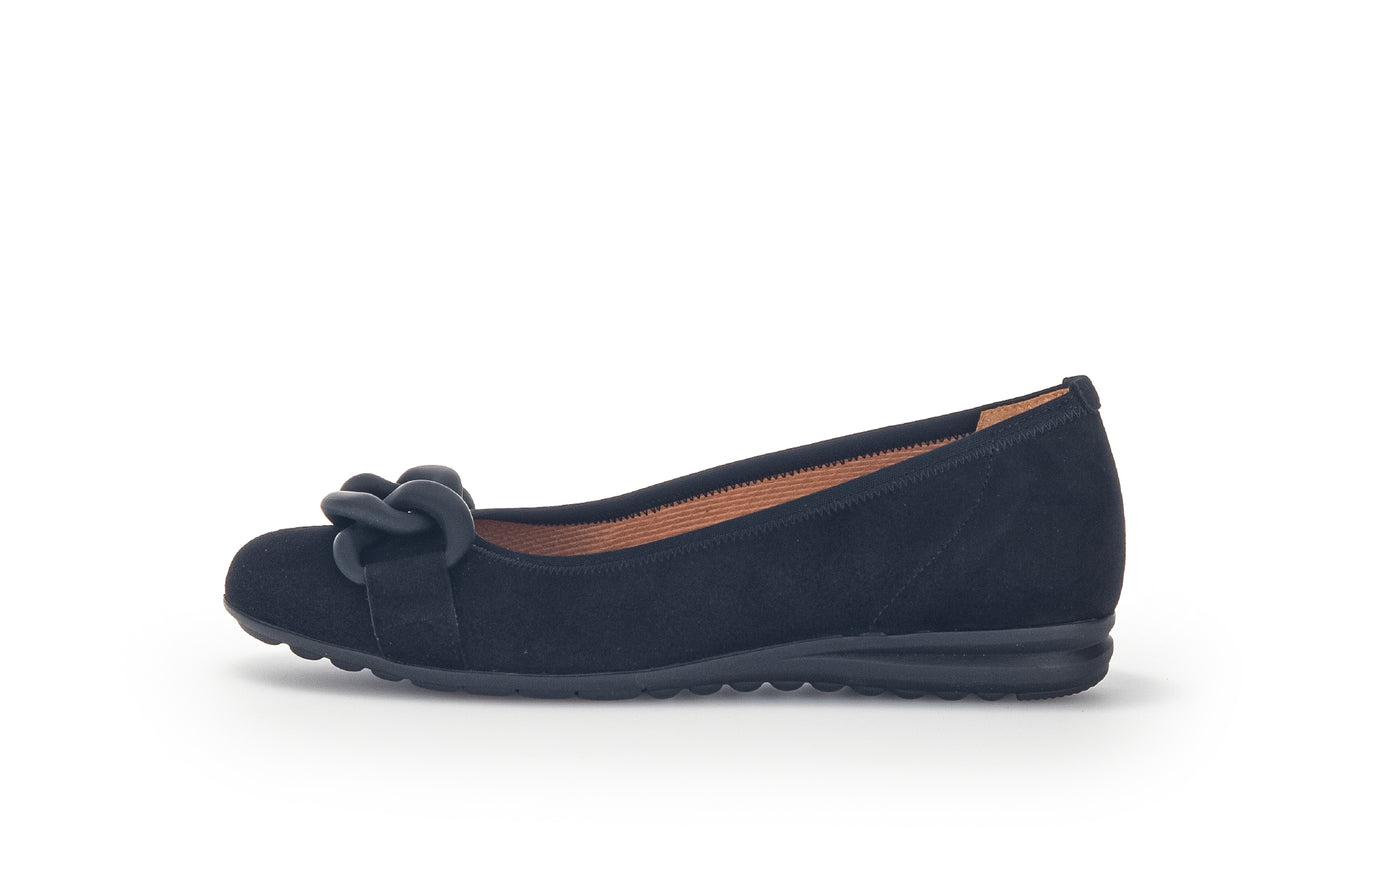 GABOR - 32.625.47 FLAT SHOE WITH CHAIN DETAIL - BLACK SUEDE